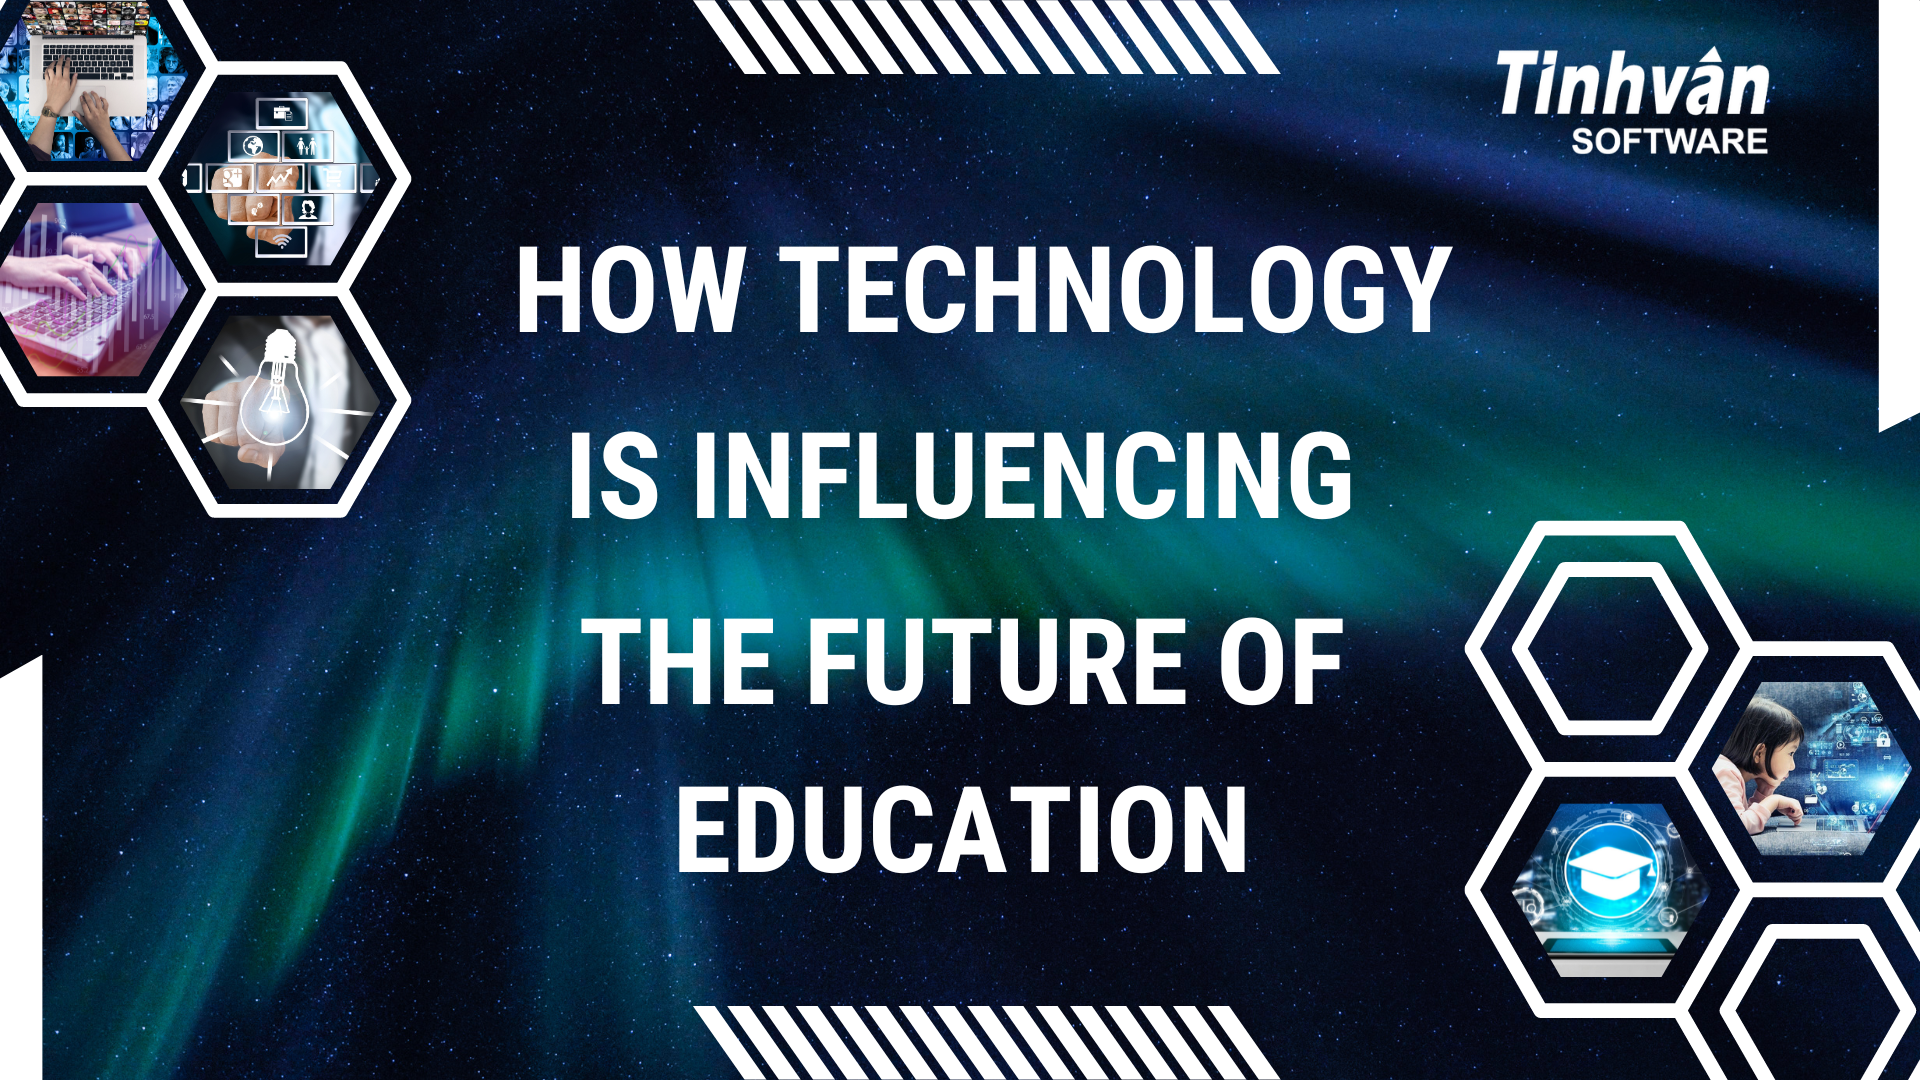 How Technology is Influencing the Future of Education